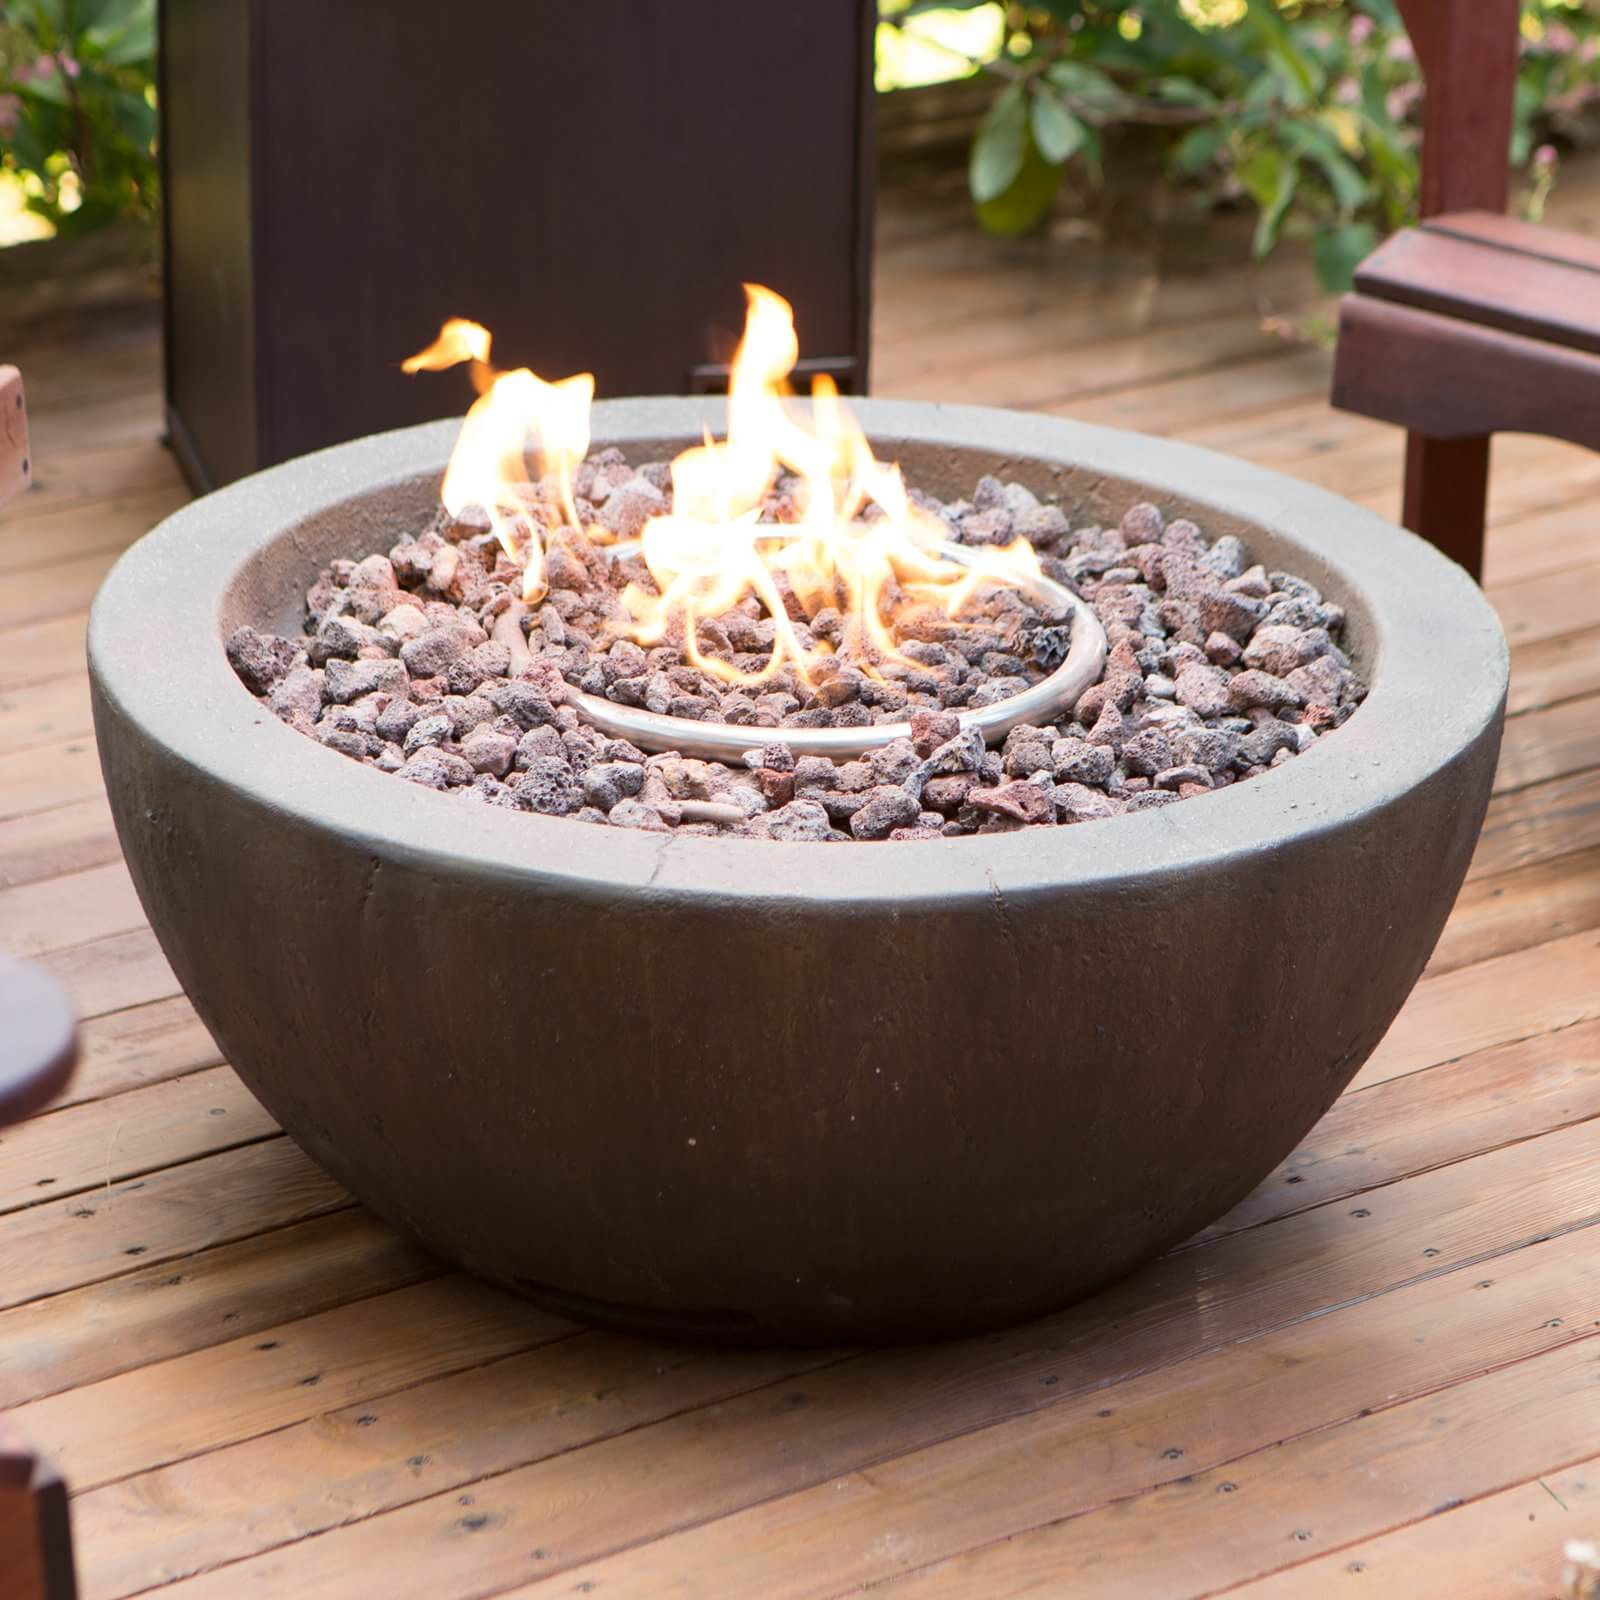 Outdoor Patio Gas Fire Pit
 42 Backyard and Patio Fire Pit Ideas